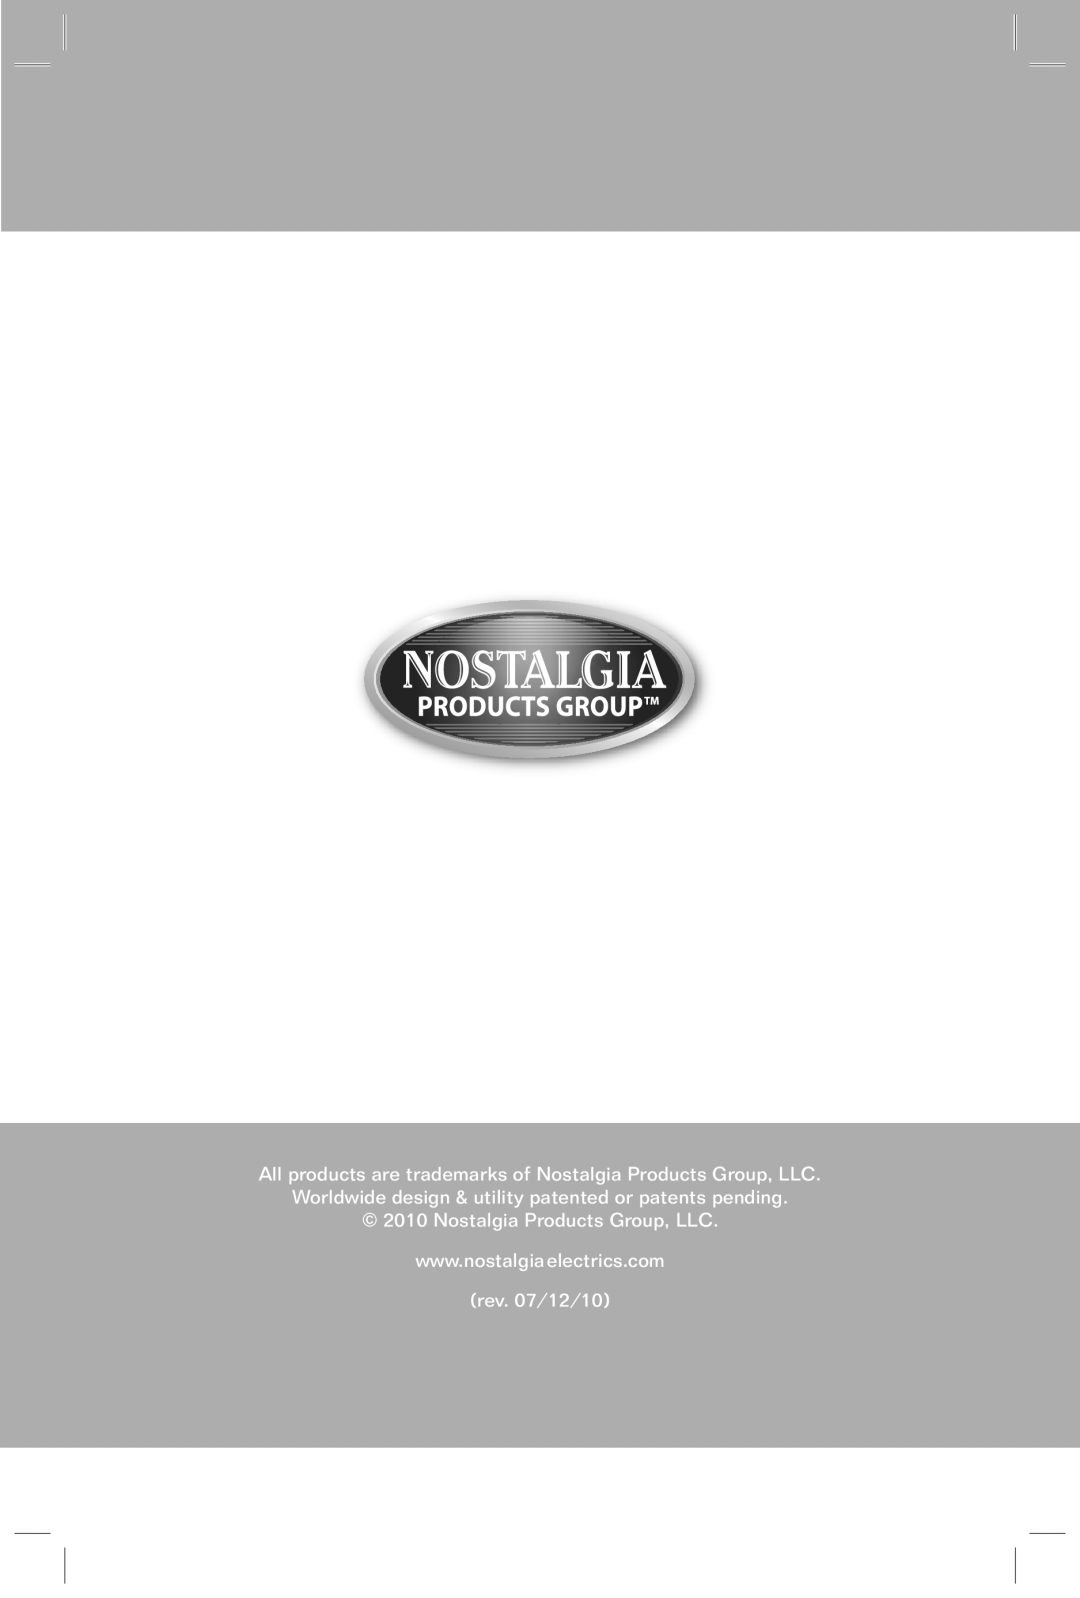 Nostalgia Electrics RKP630 manual All products are trademarks of Nostalgia Products Group, LLC, rev. 07/12/10 